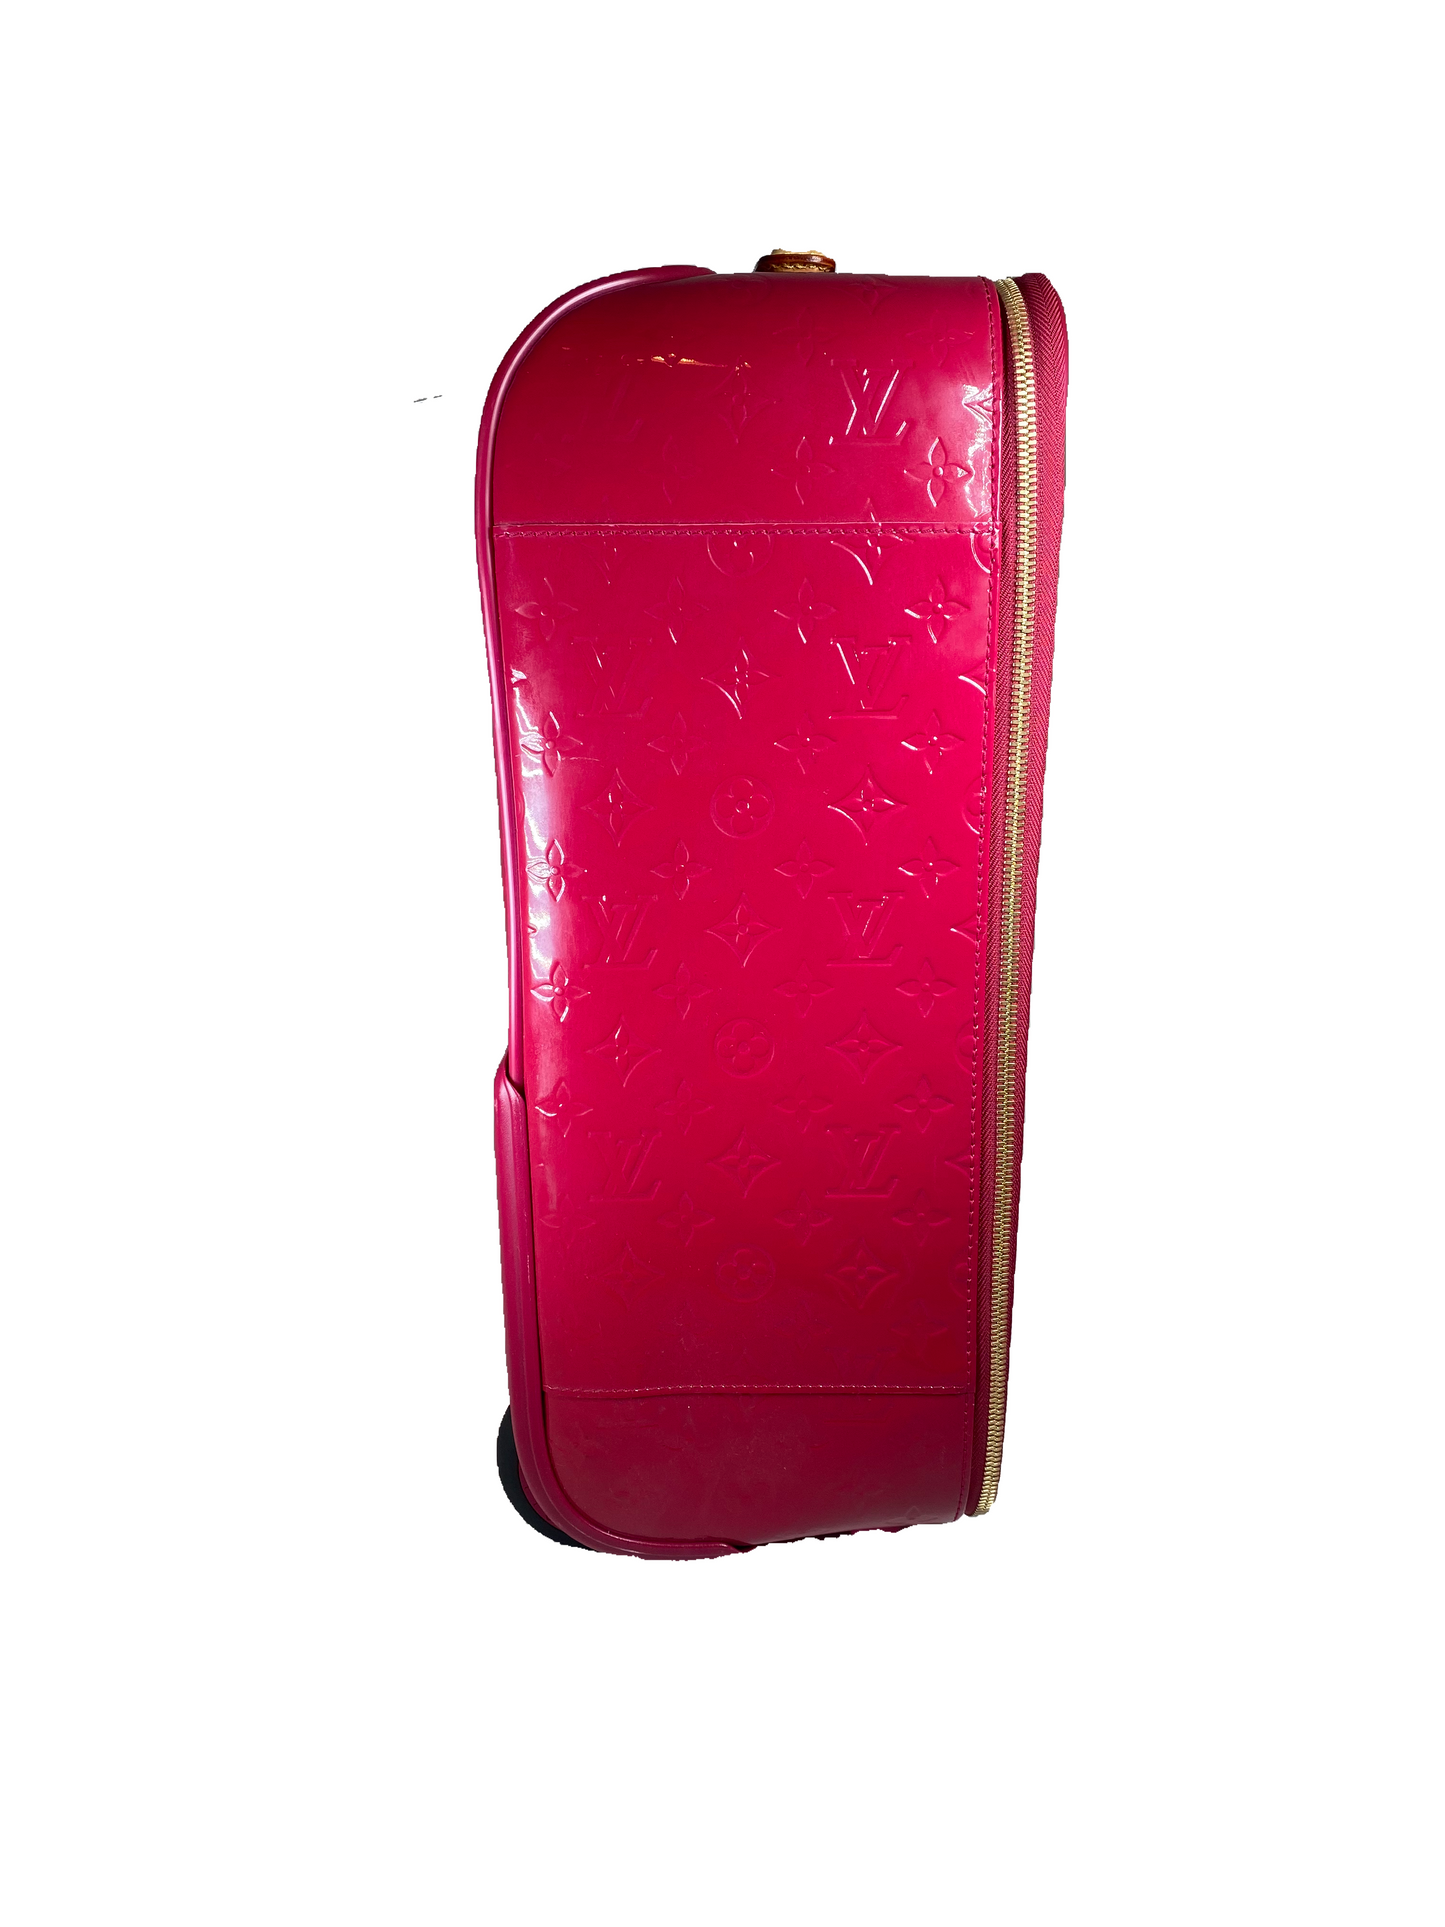 Louis Vuitton Patent Leather Pegase Luggage Vernis 45 in Red